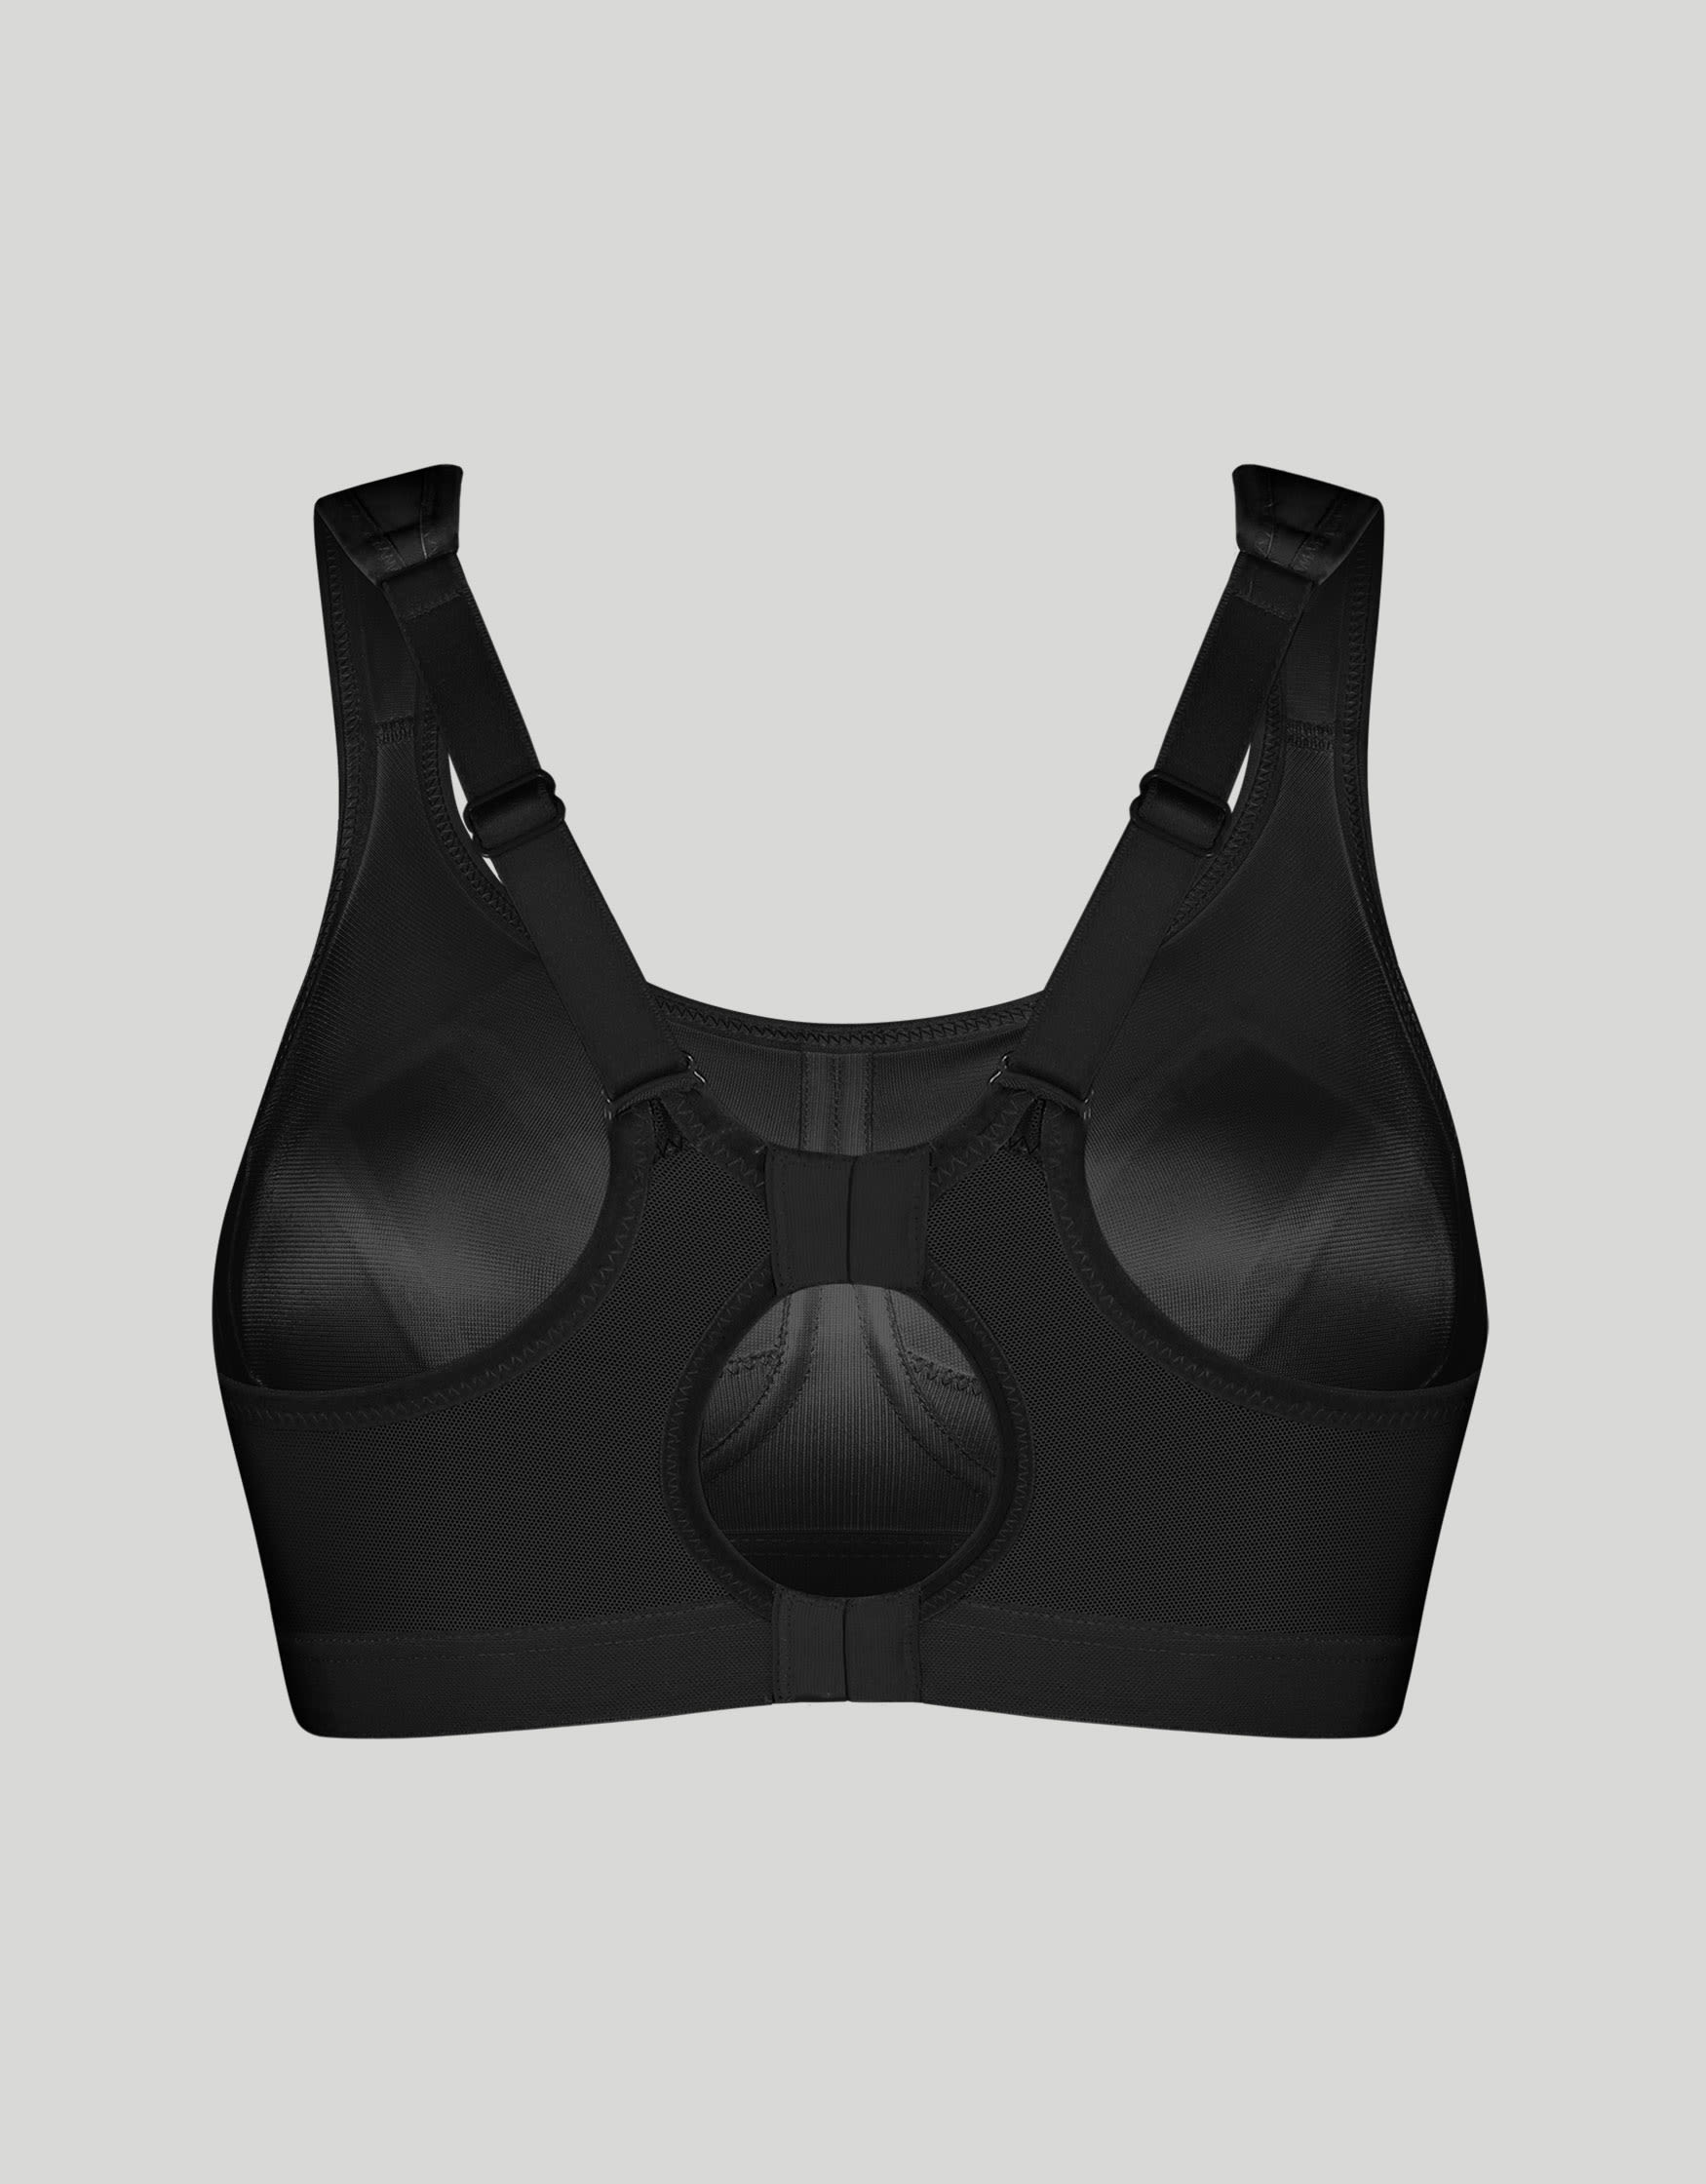 CHAMPION Black The Absolute Workout Unlined Sports Bra, US Small, NWOT